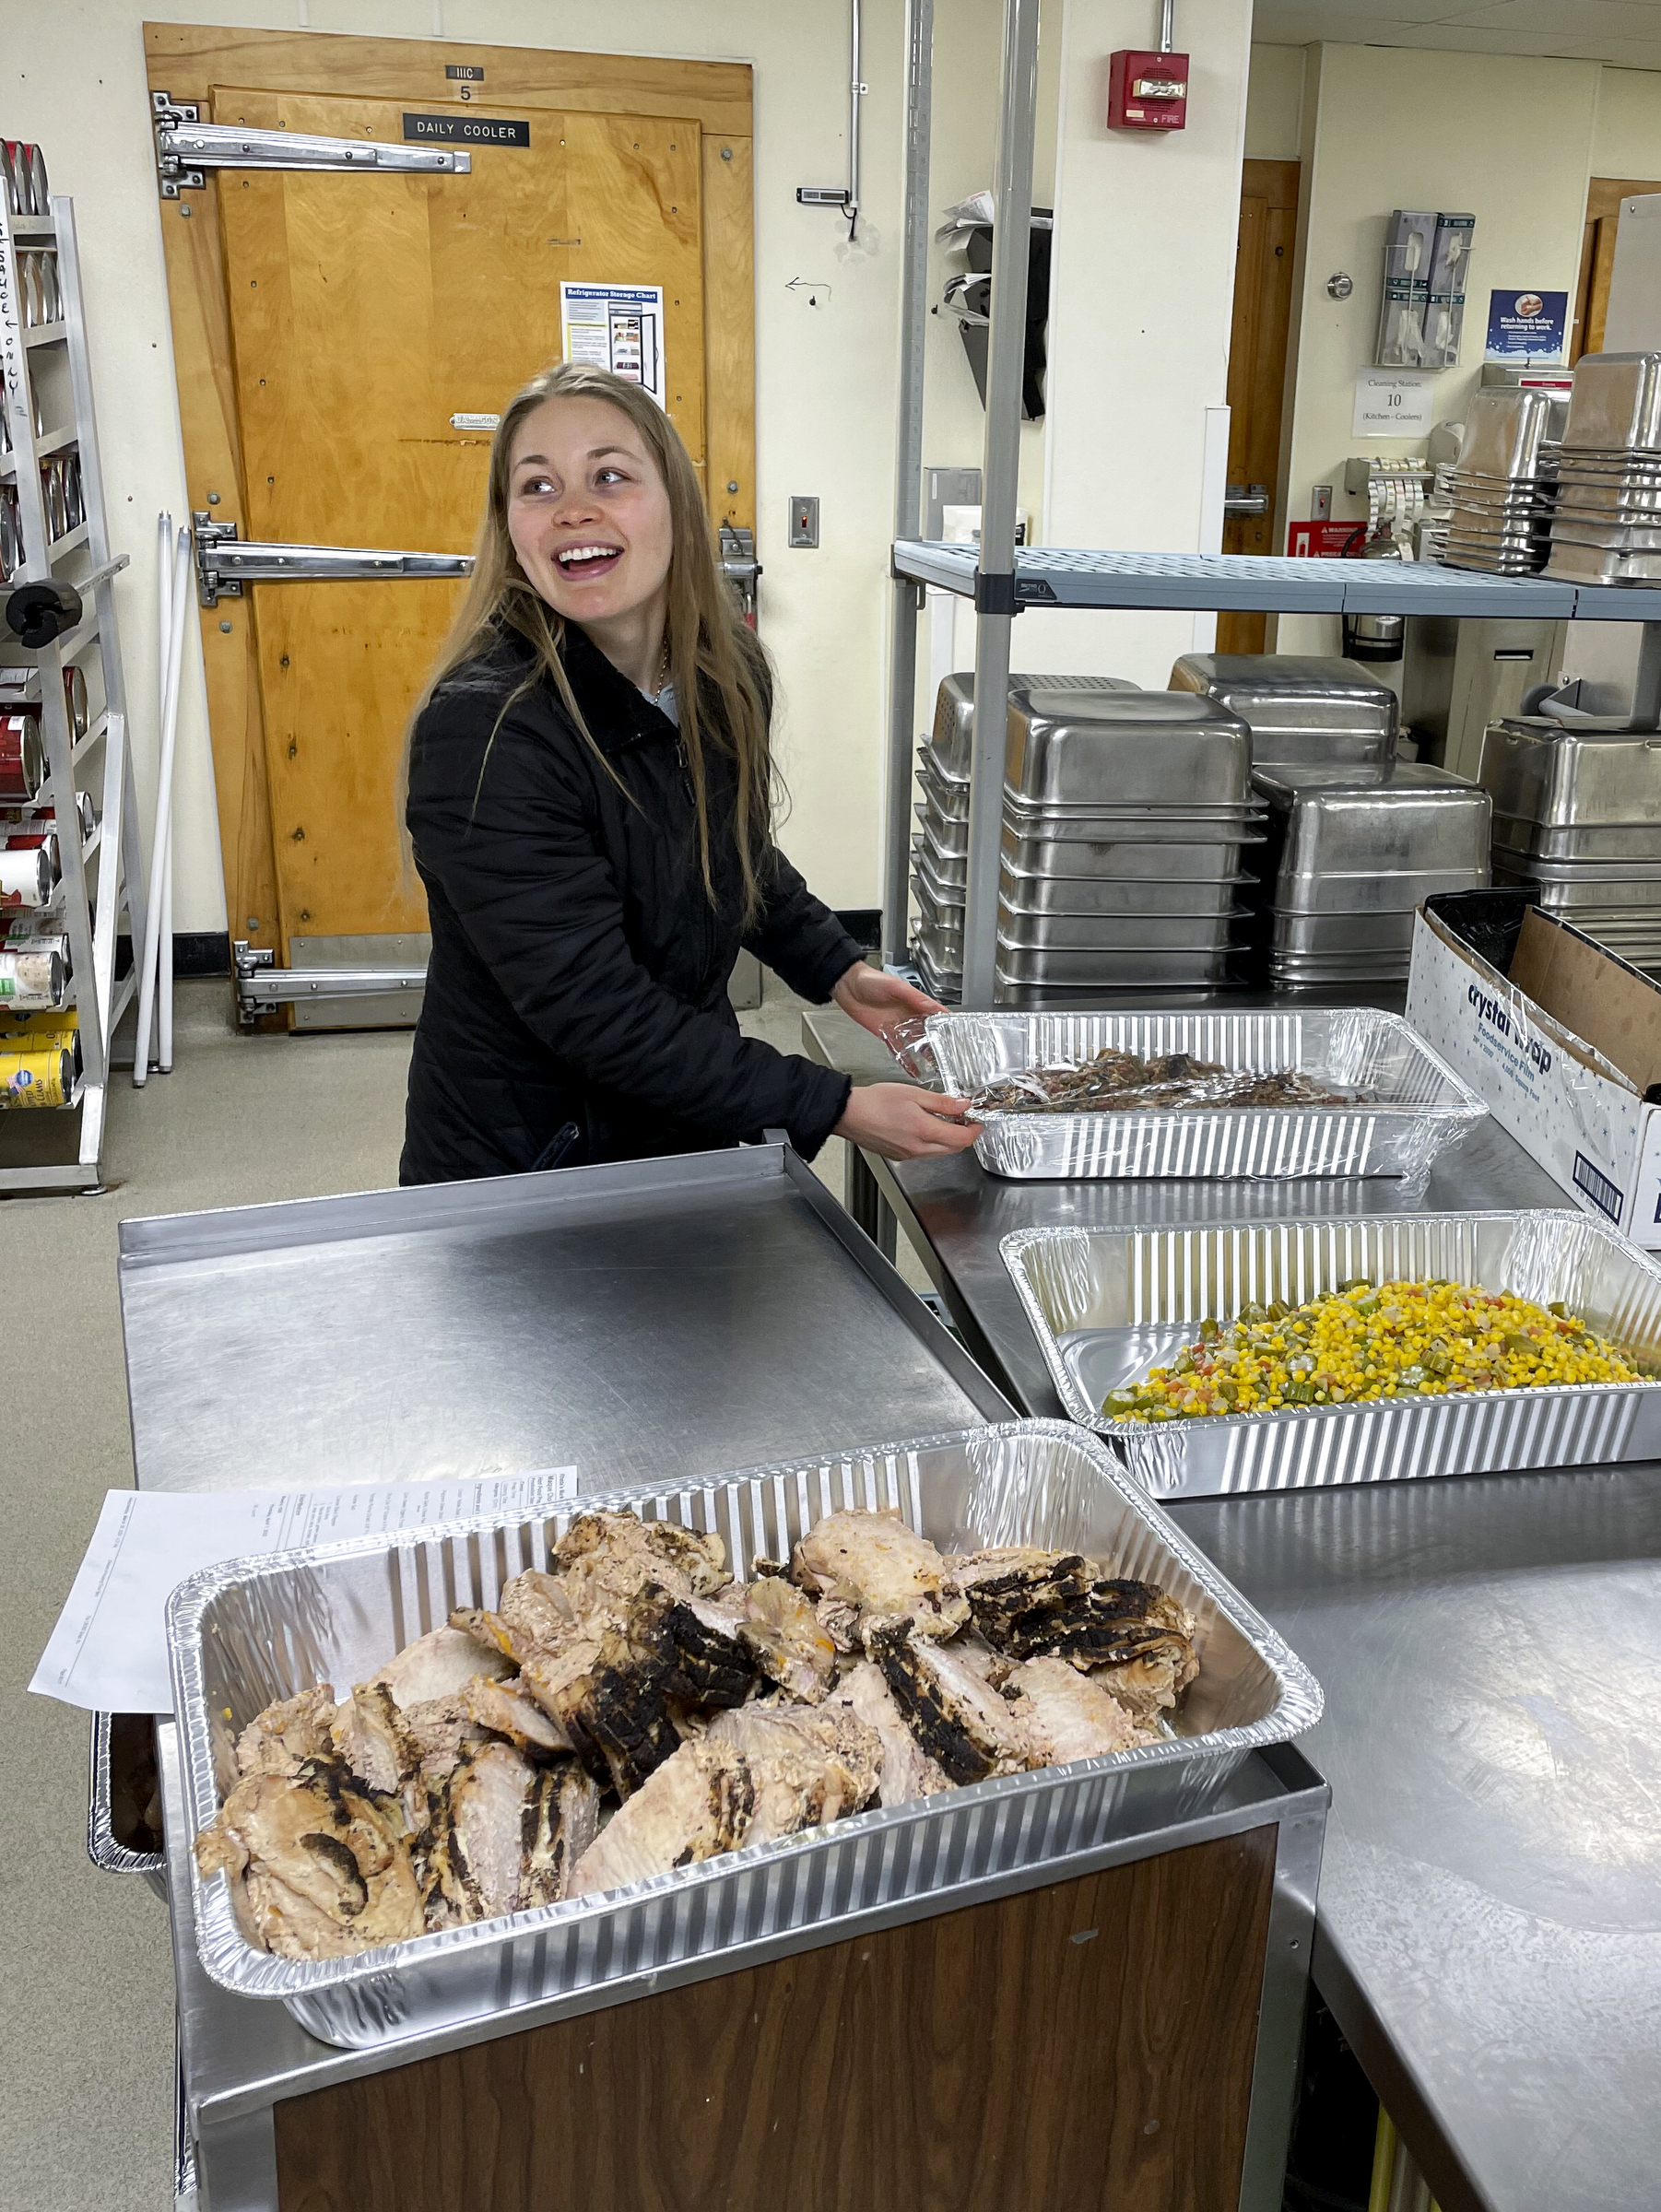 Morgan Barlin of the University of Wisconsin-Madison Food Recovery Network branch collects leftover food